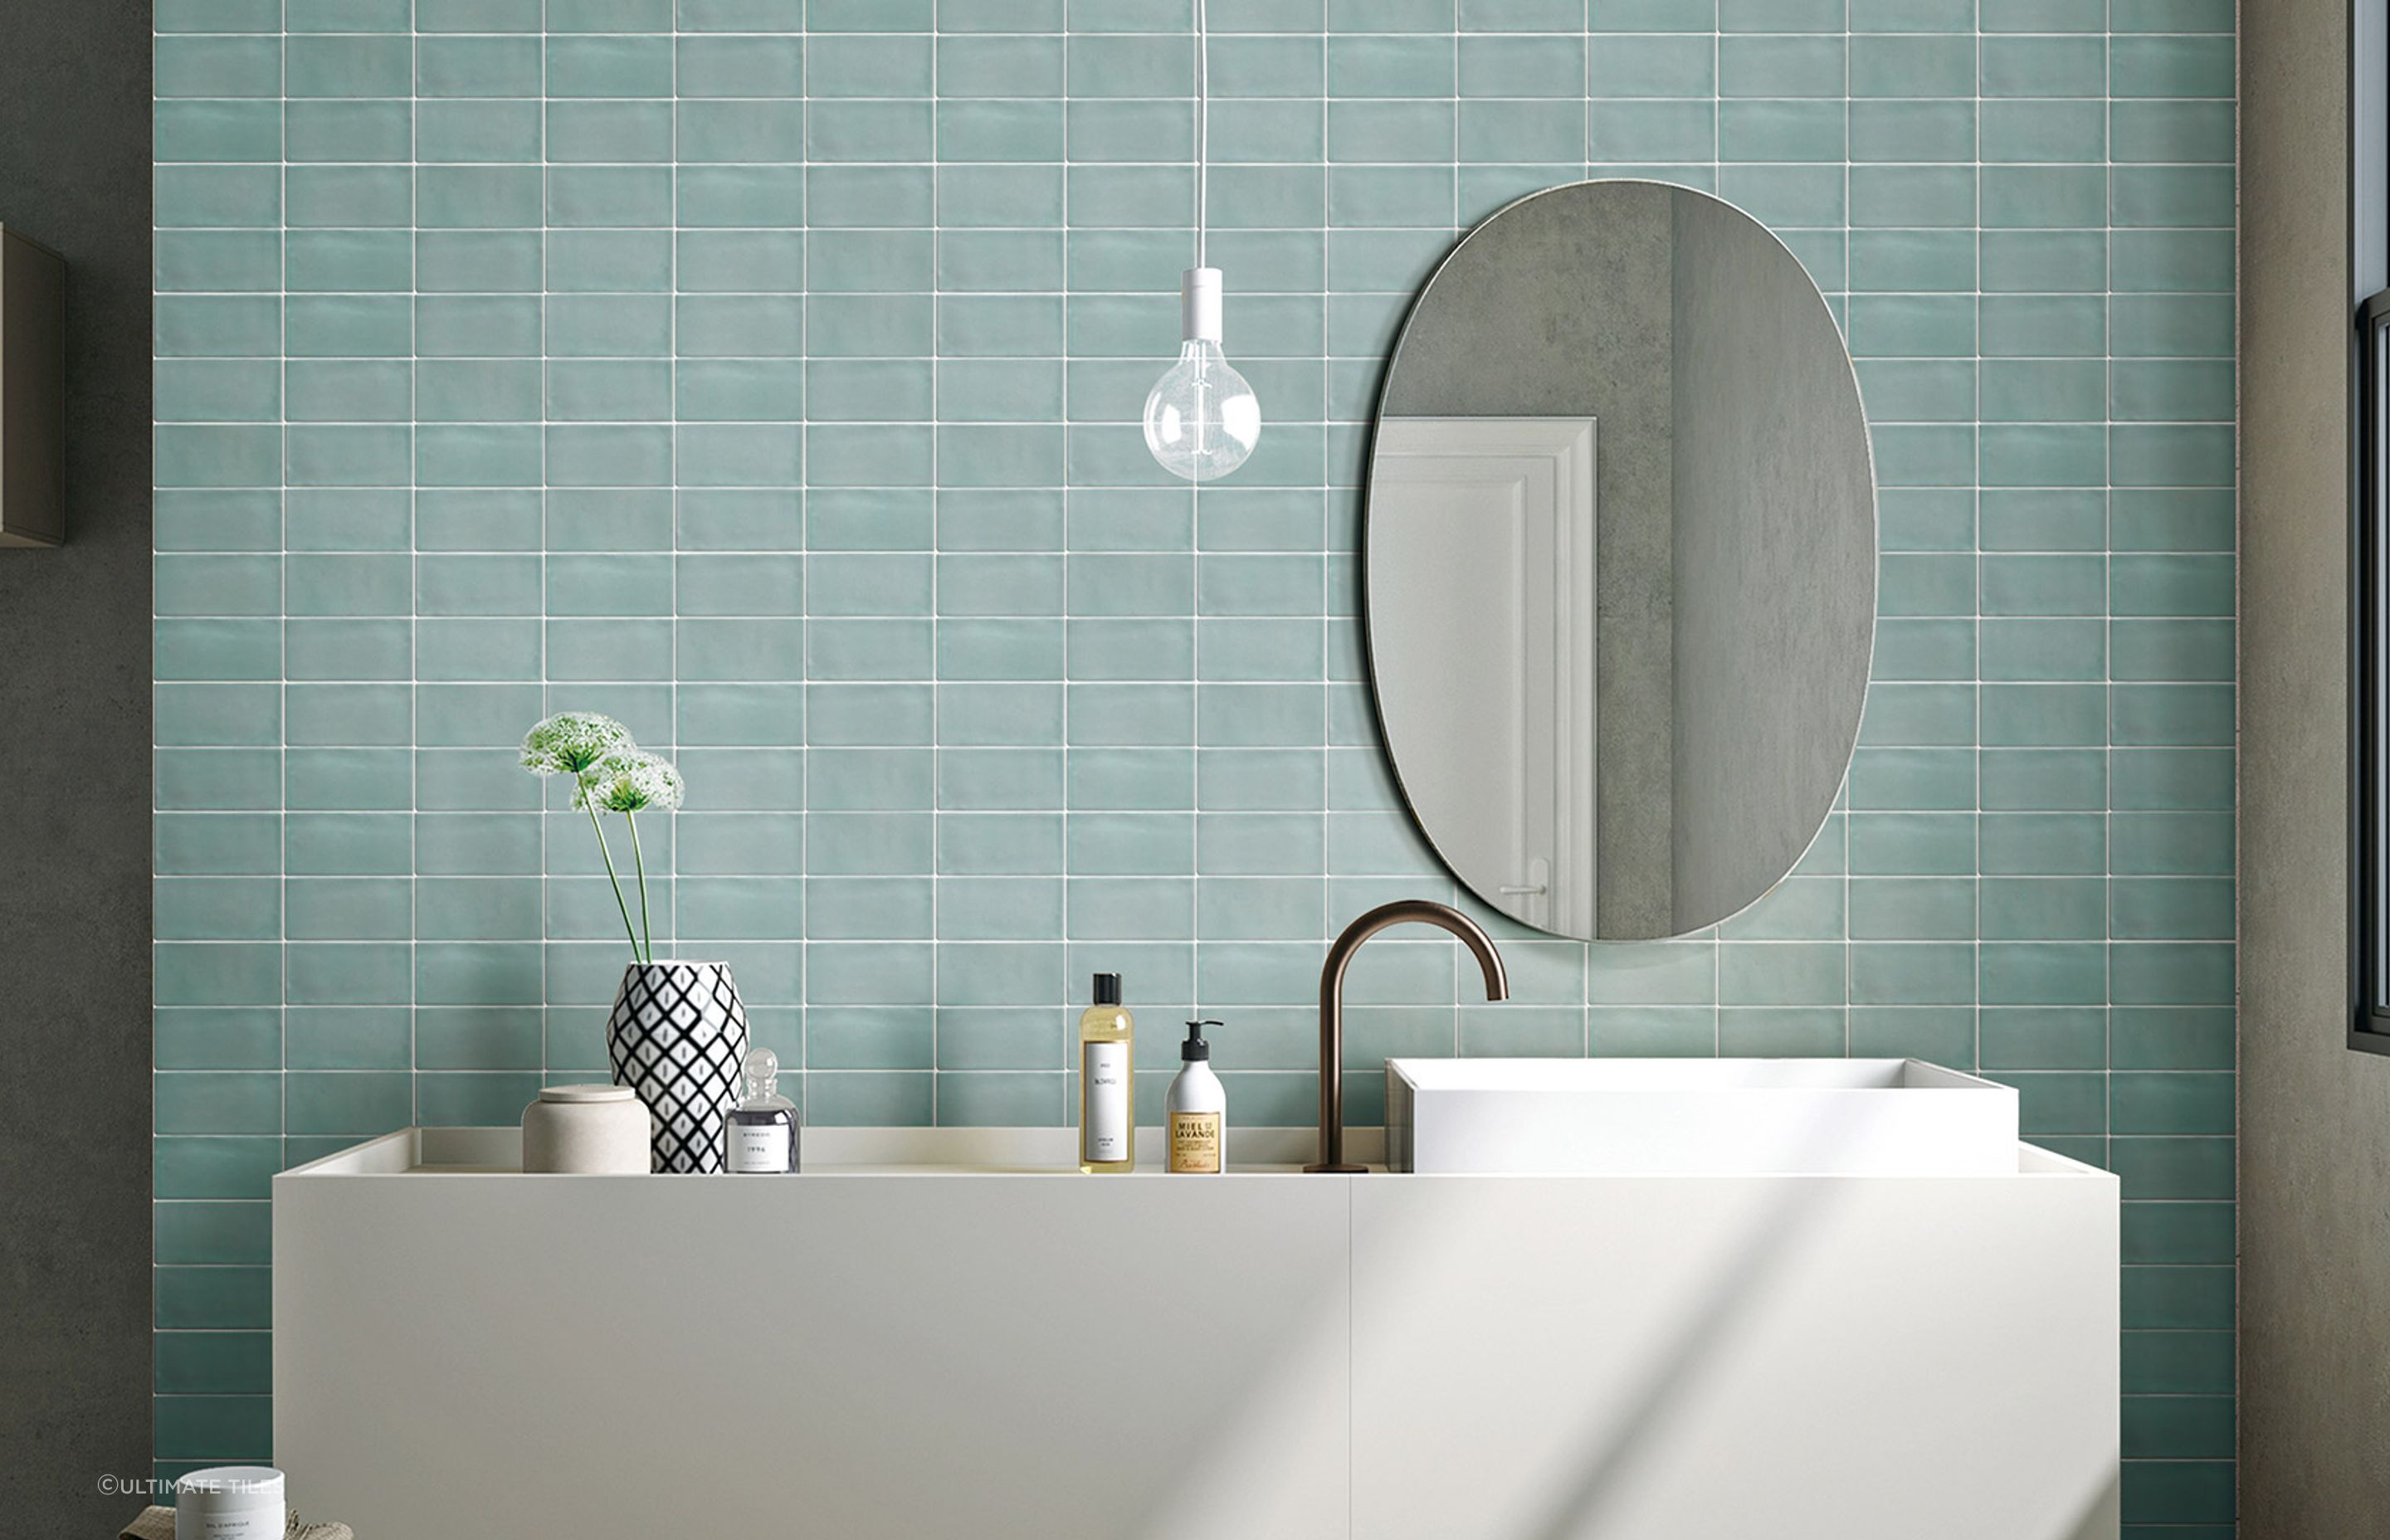 The refreshing Luxe Mint tiles from Ultimate Tiles